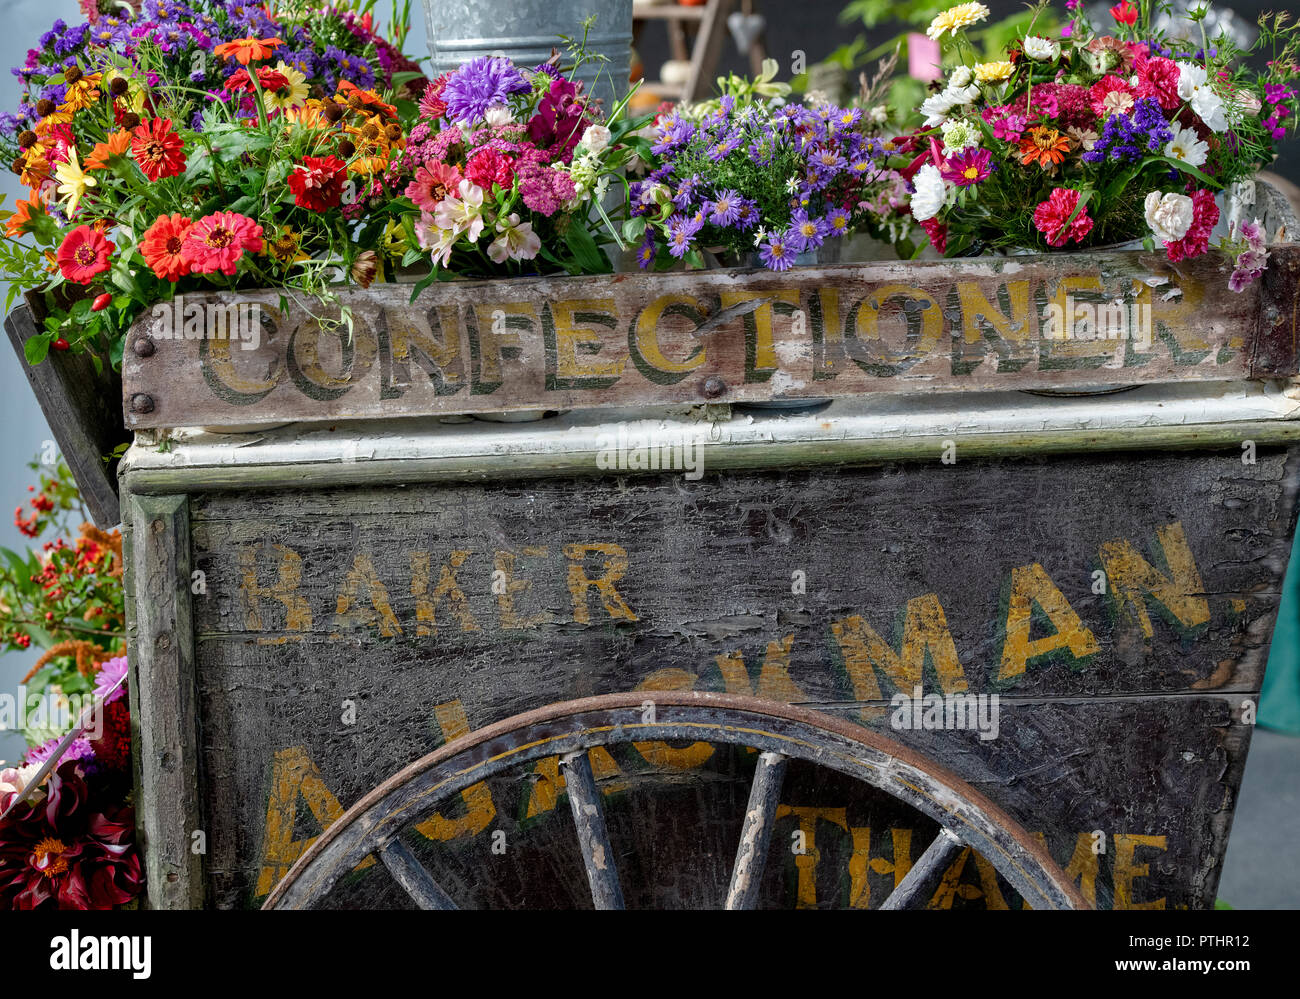 Floral display on an old wooden cart at an Autumn show. UK Stock Photo